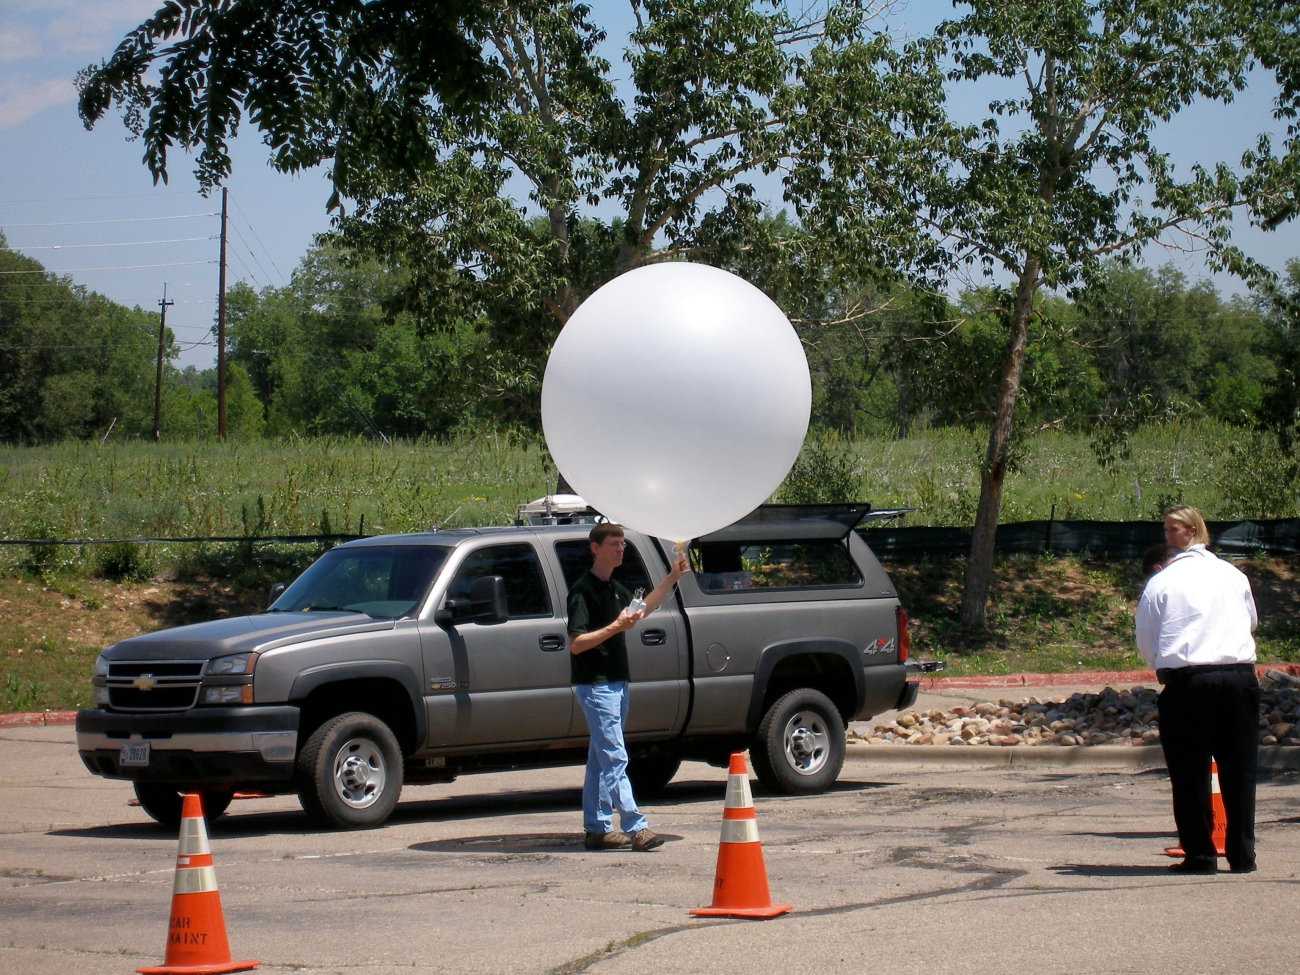 Launching a weather balloon